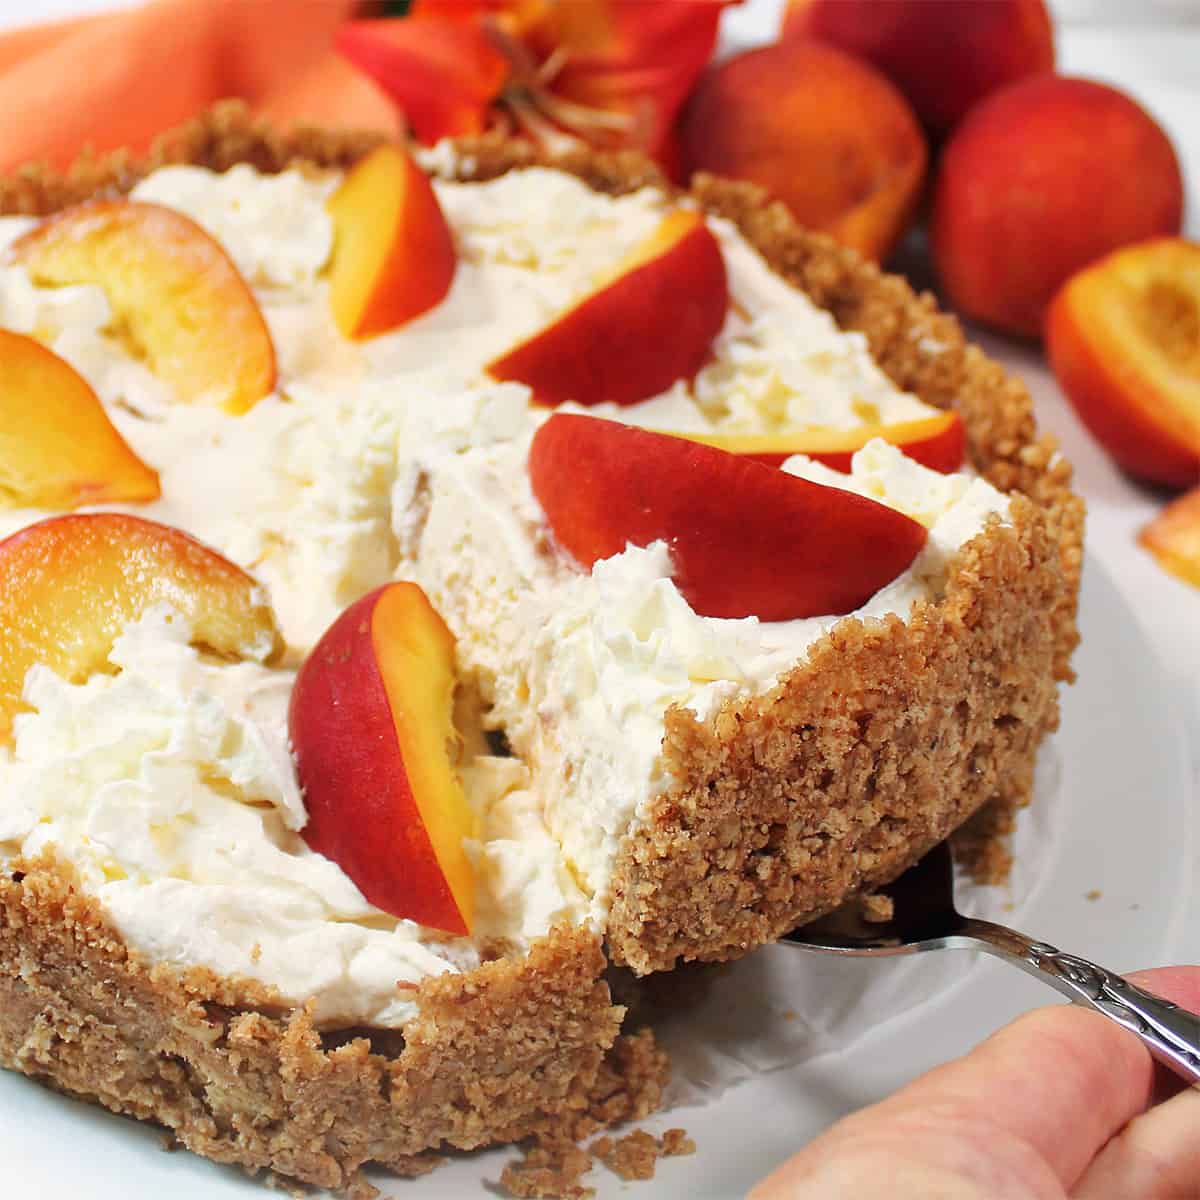 Lifting slice of no bake peach cheesecake out of pie.